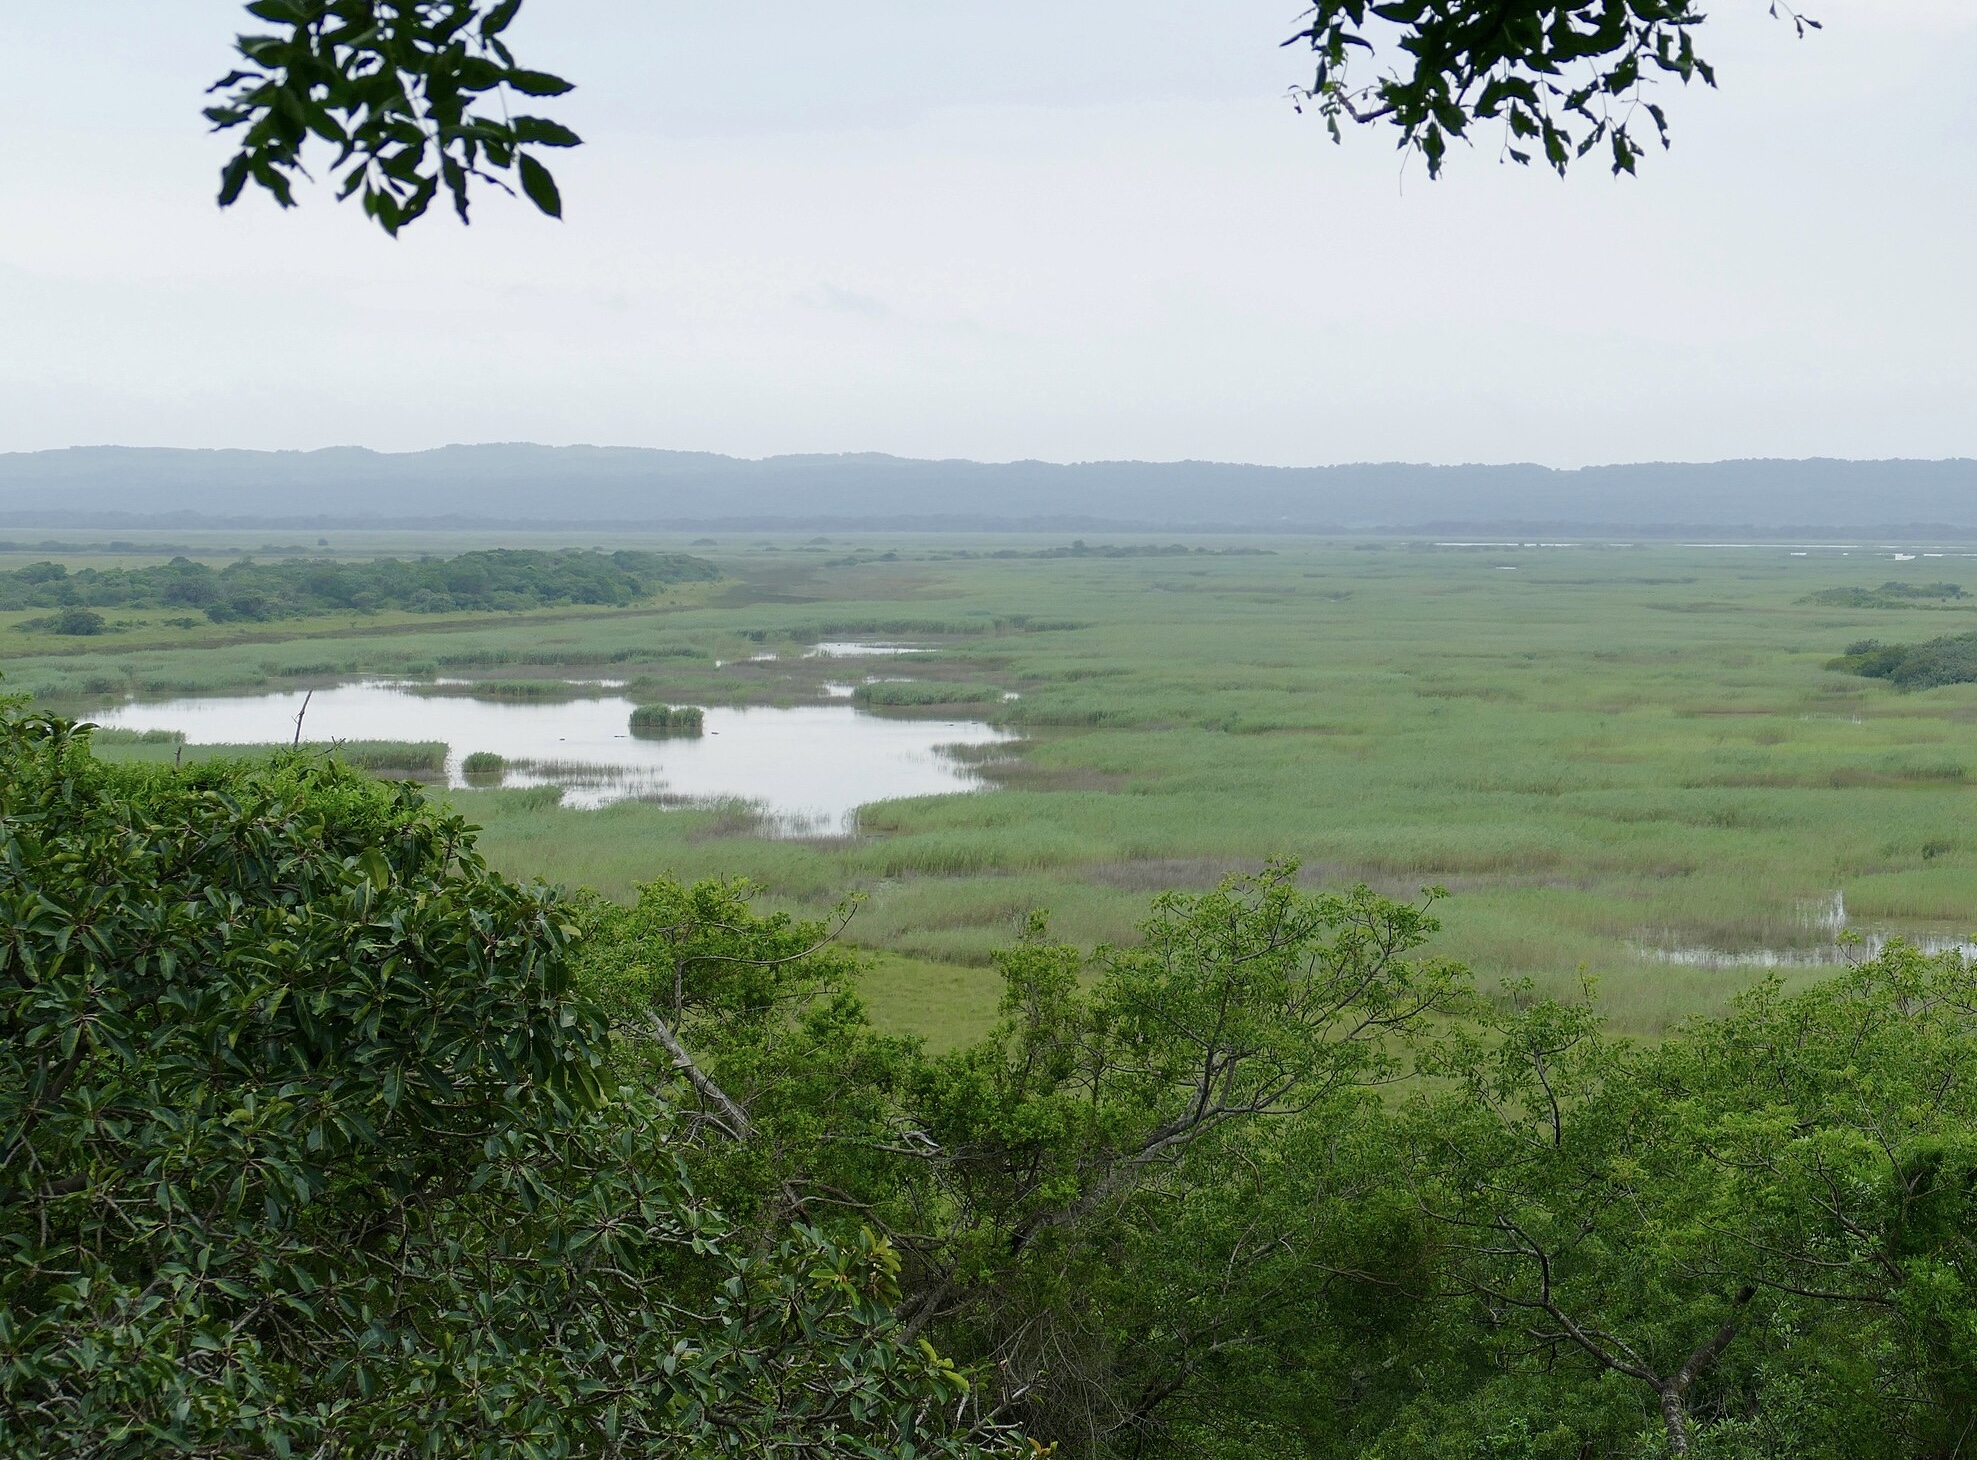 Photo taken in the iSimangaliso Wetlands, South Africa. This image is an example of the preferred environmental conditions for Limpo grass. There is a pond in the center of the photo and the sky is gray and looks humid. This photo displays the moisture limpo grass needs to thrive.